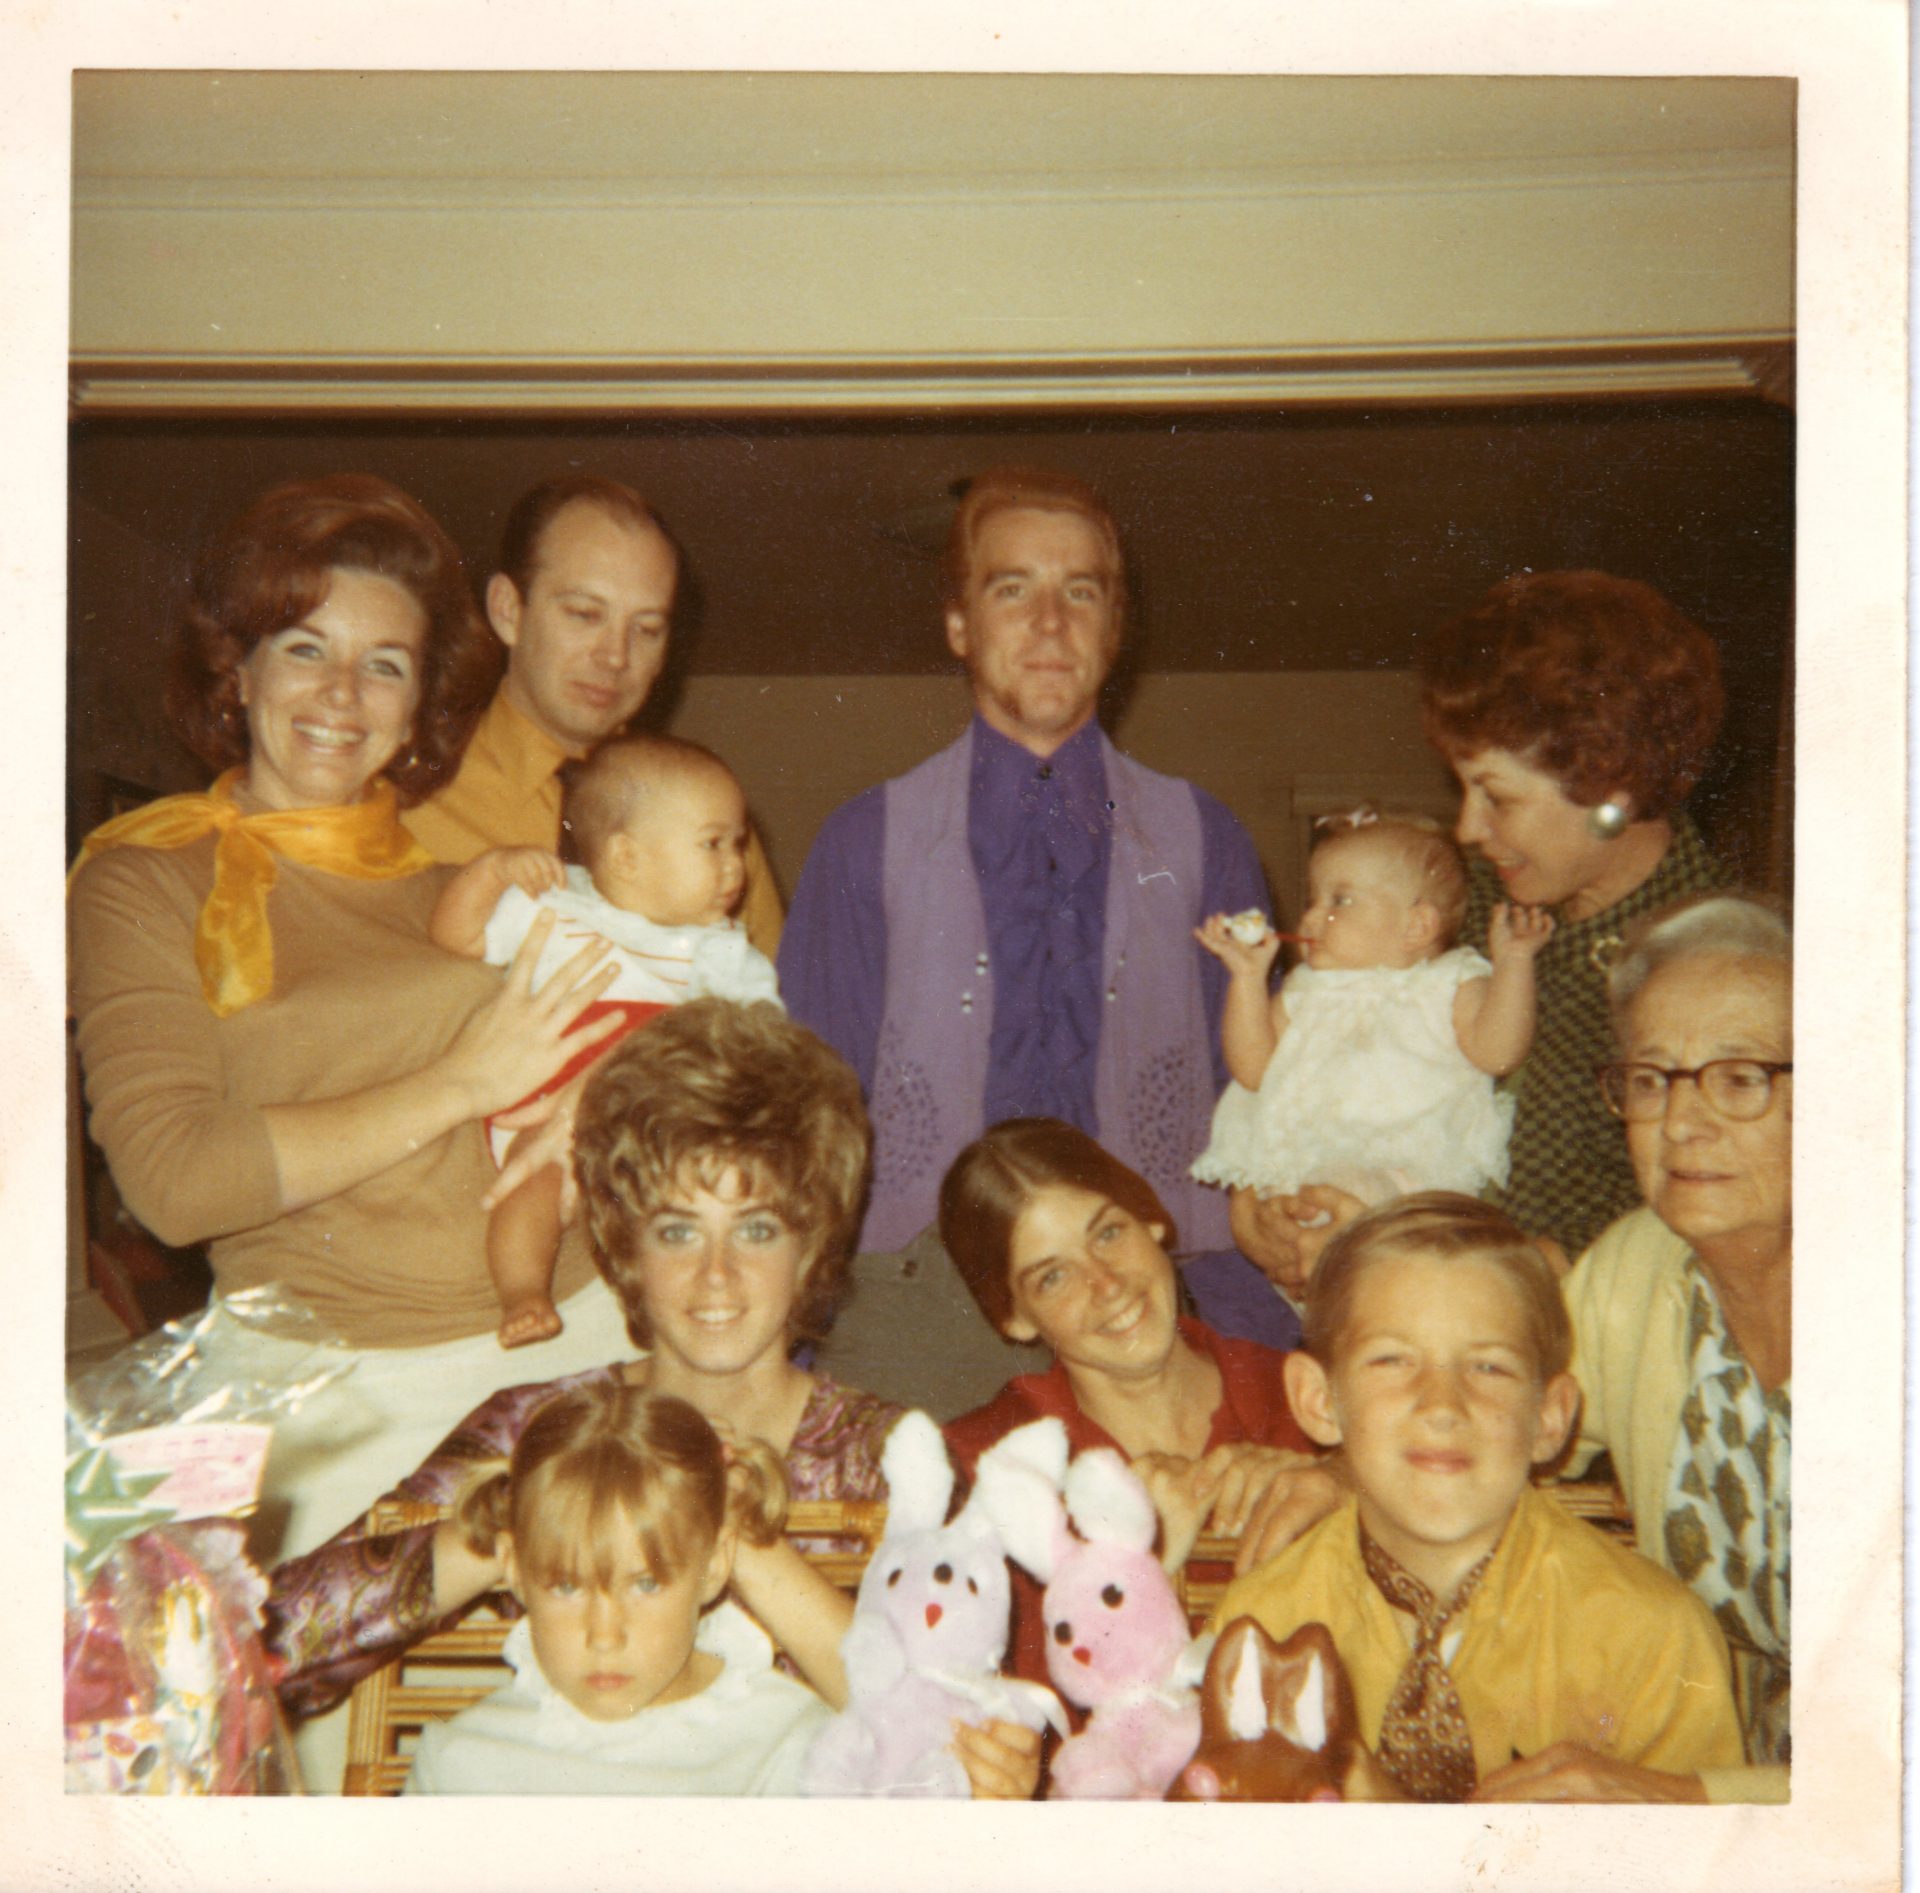 Dennis in center back, in 1970.<br />
With my mother and aunties n grandma